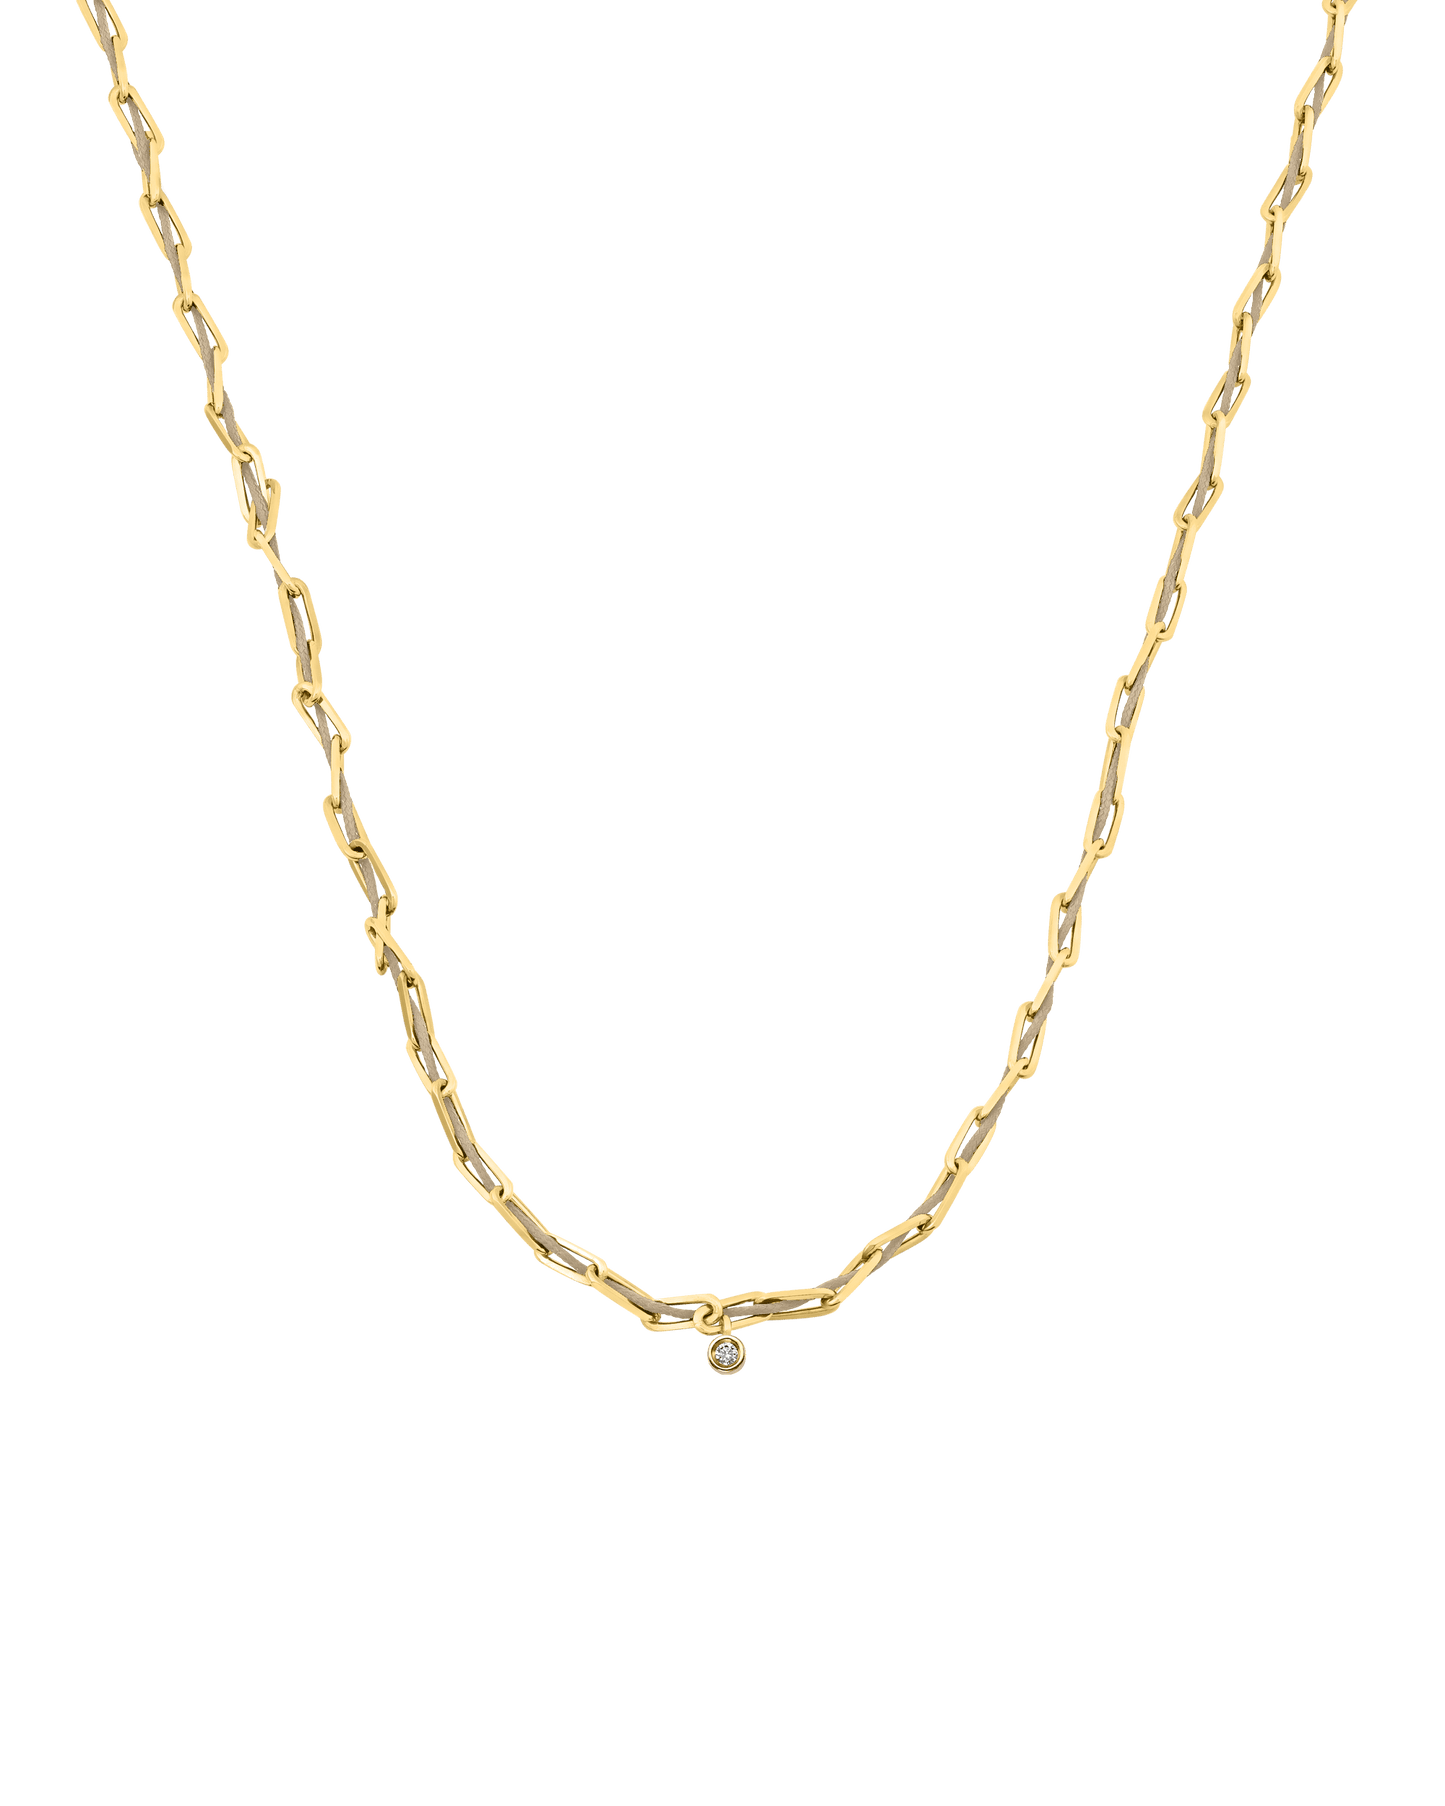 Twine Diamond Necklace - 18K Gold Vermeil Necklaces magal-dev Sand Small: 0.03ct 16"